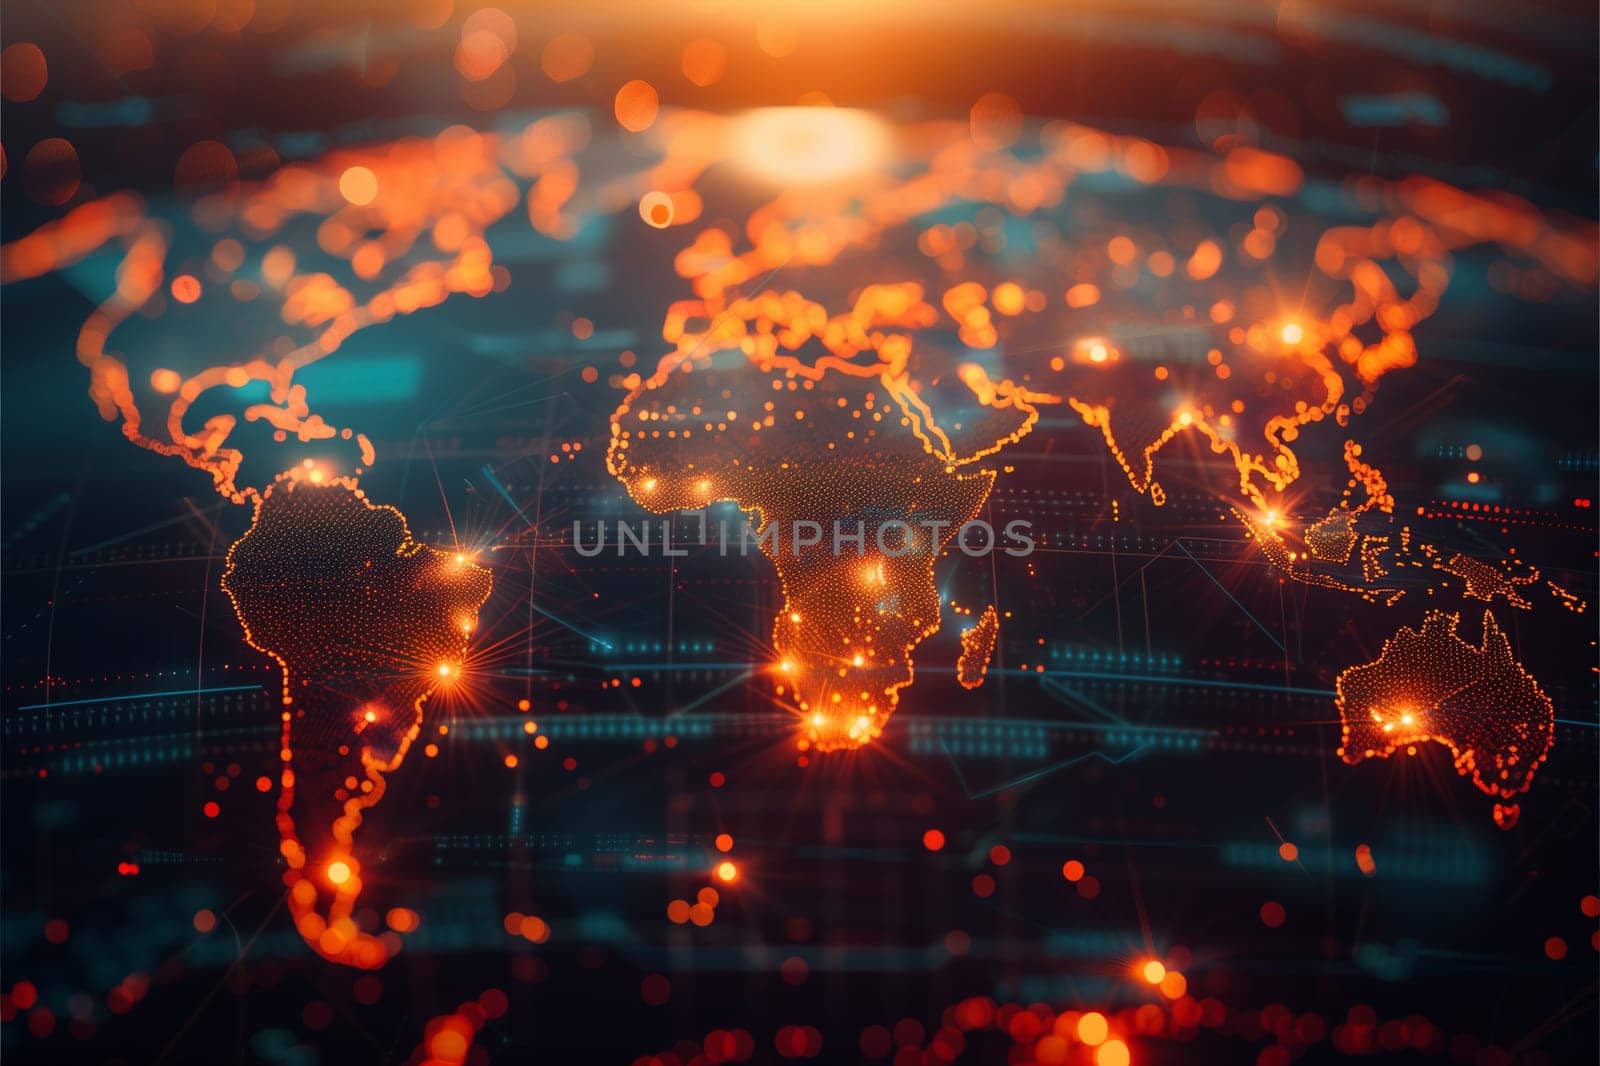 A digitally rendered world map with glowing continents and cities.